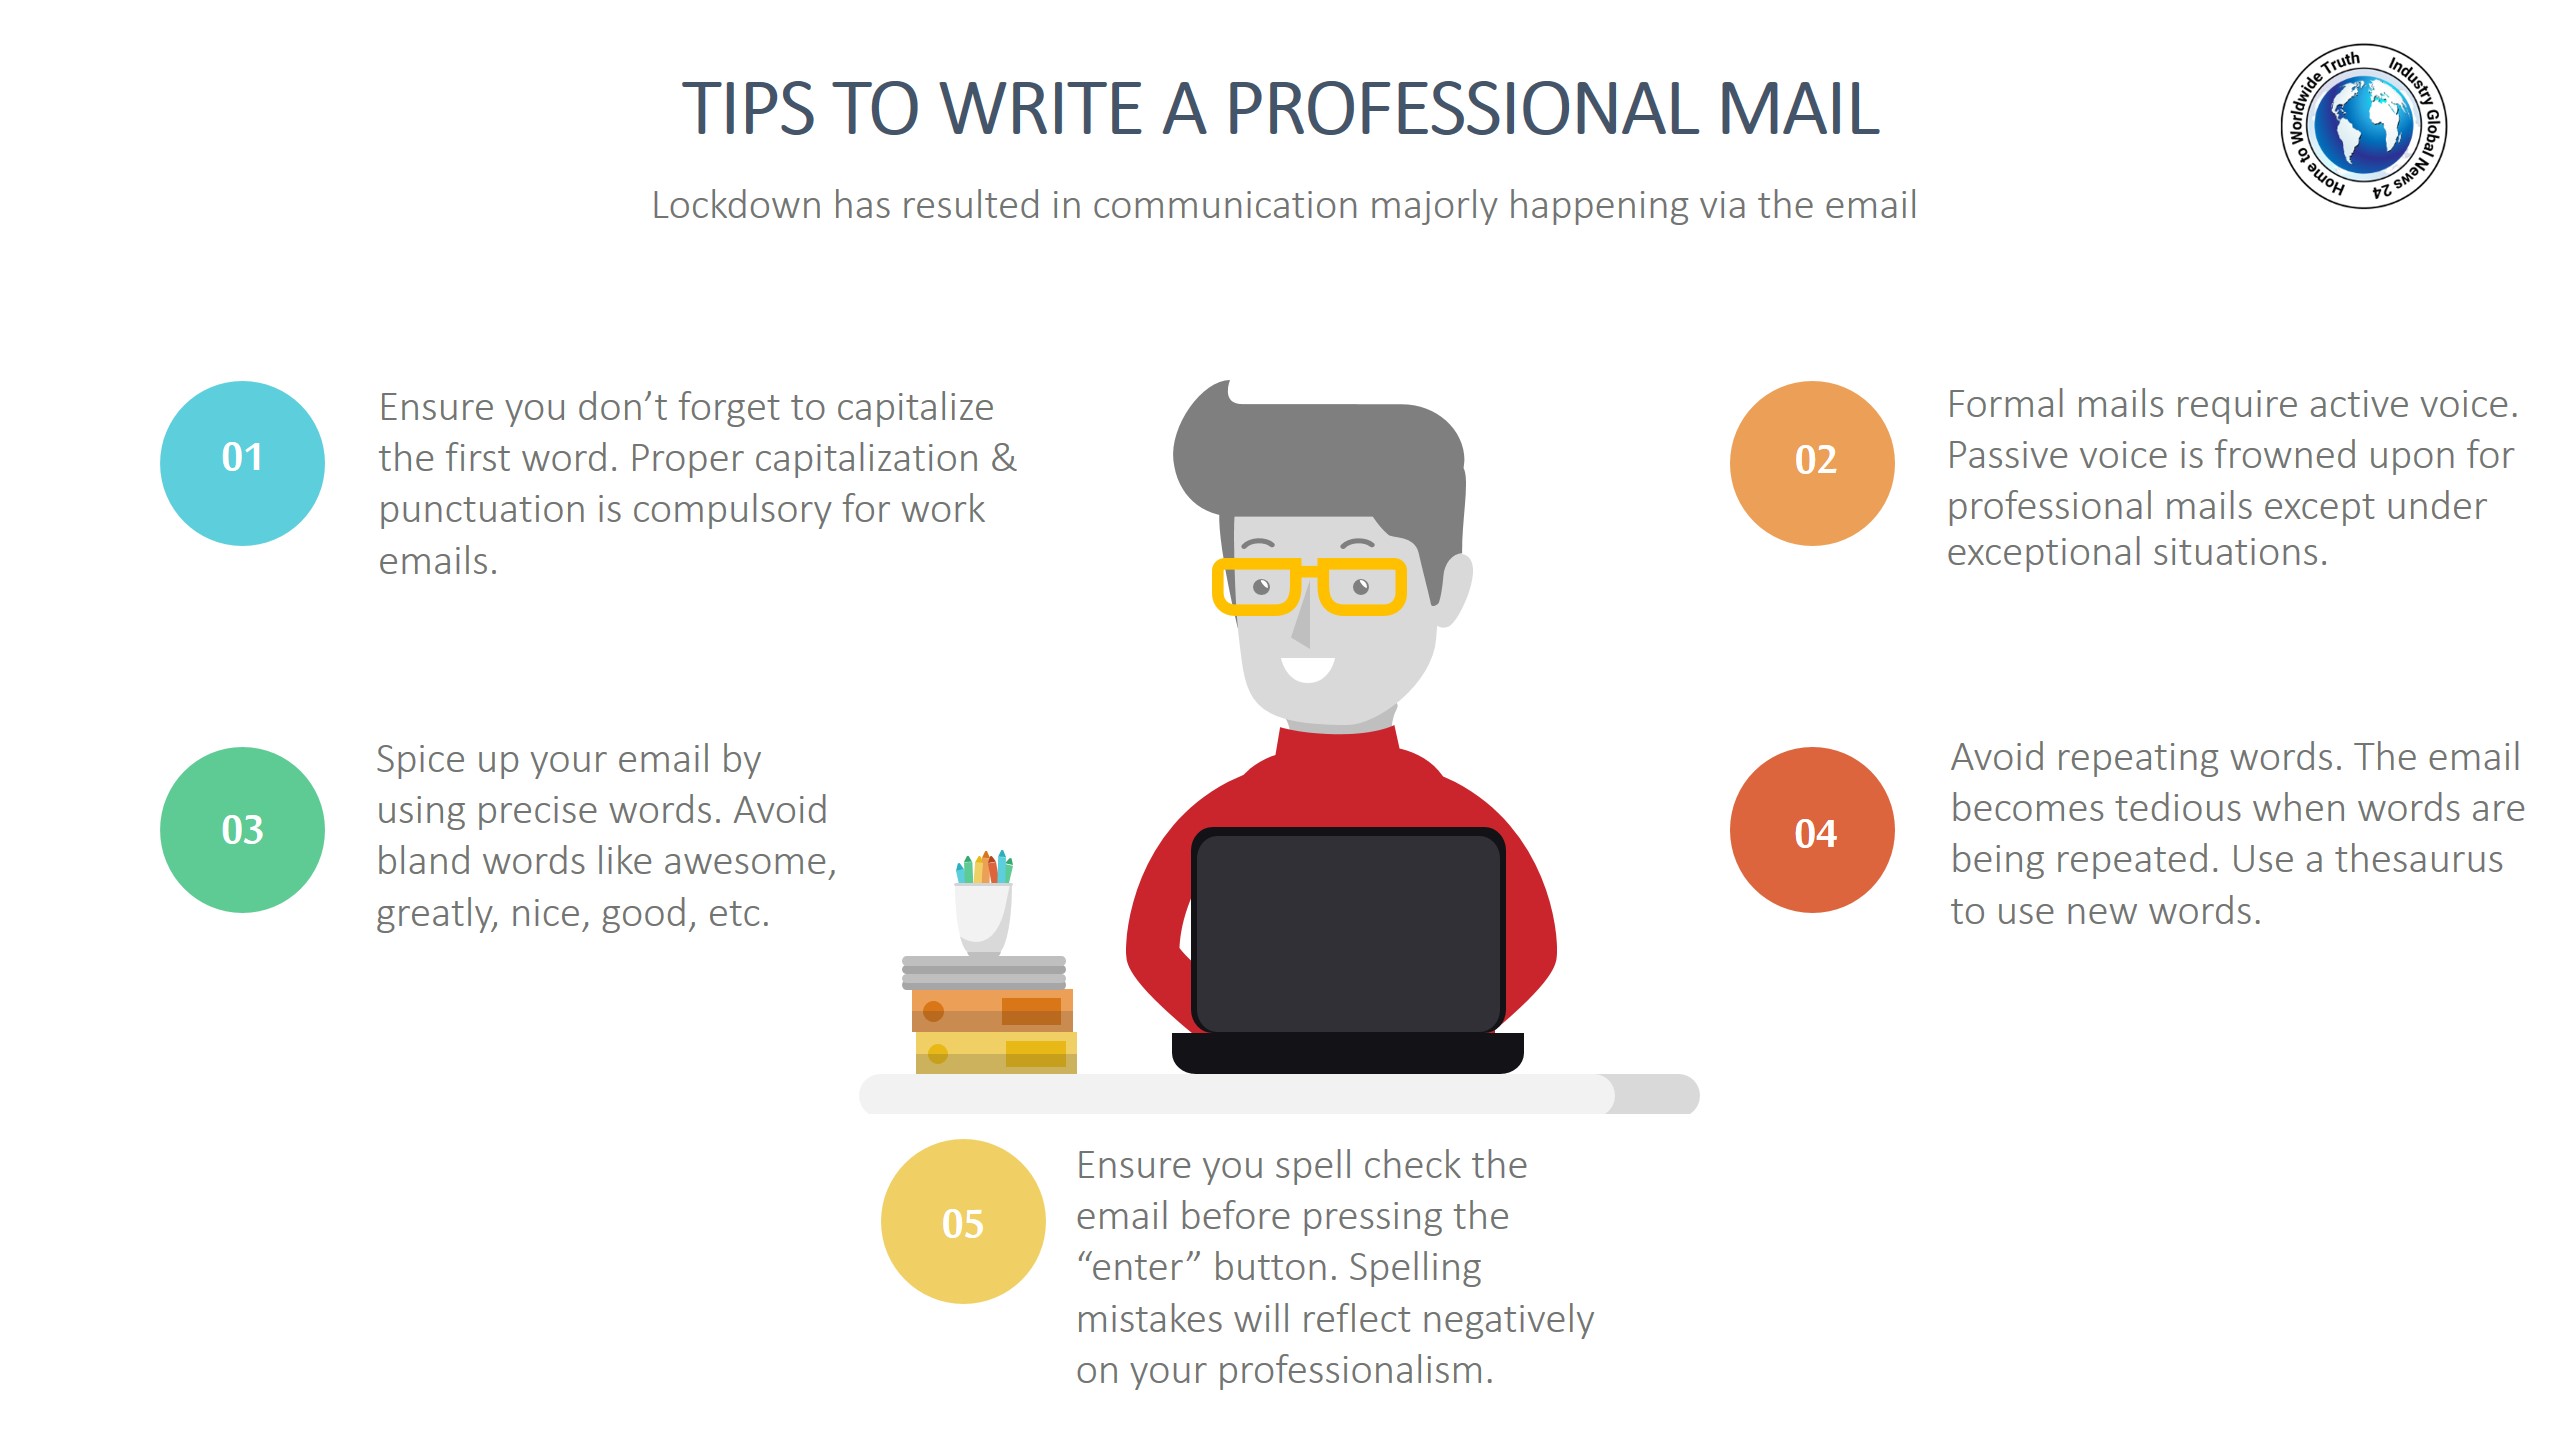 Tips to write a professional mail  Industry Global News28